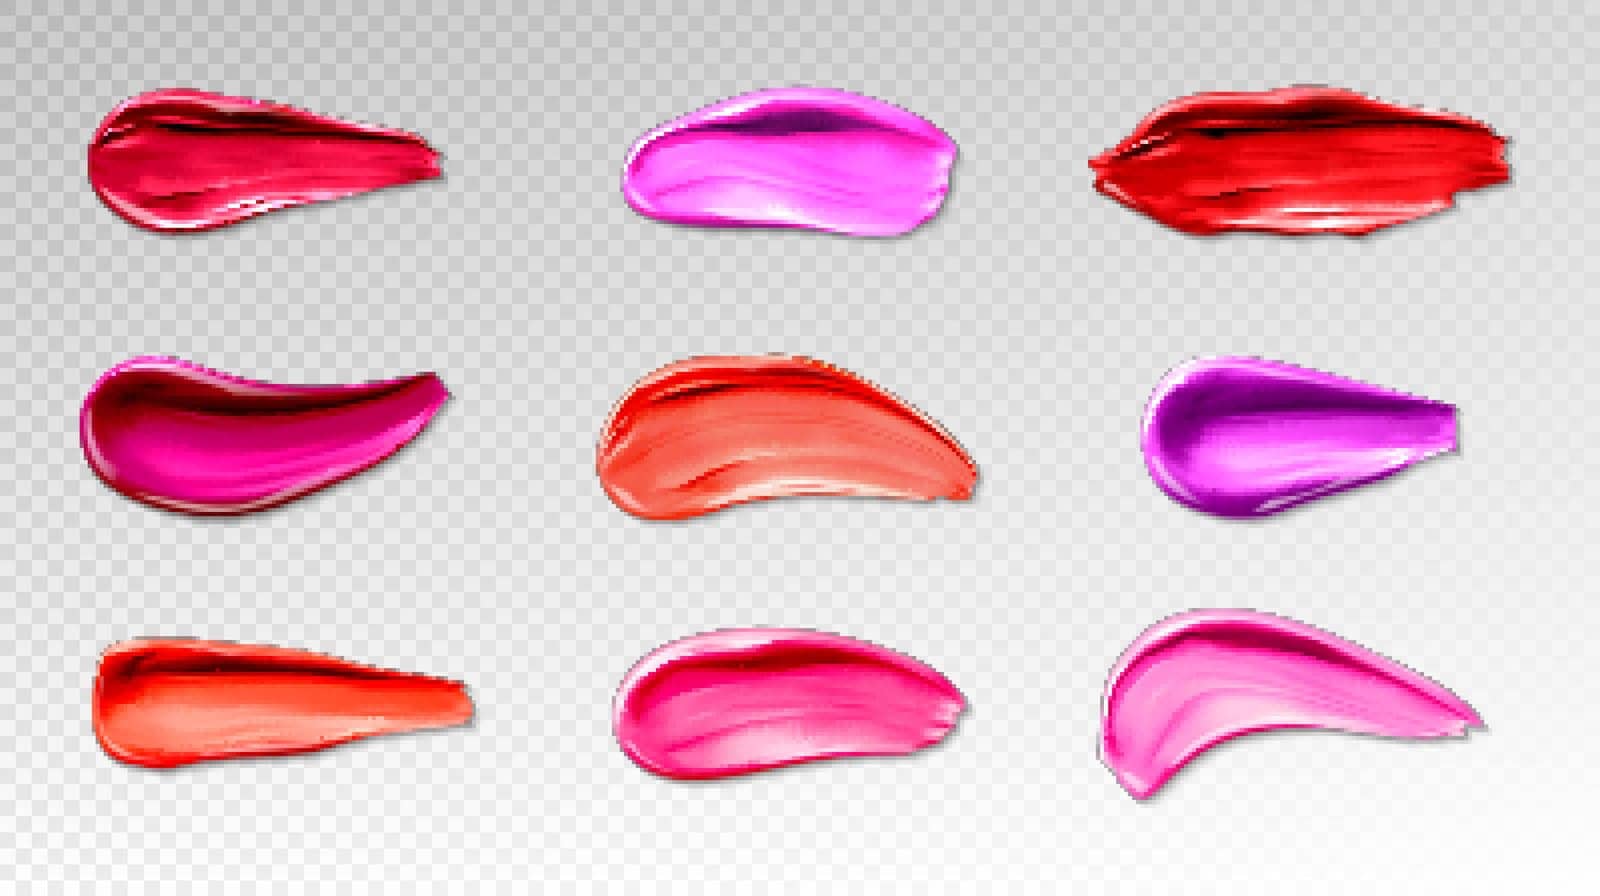 Lipstick swatches, smears of liquid lip gloss for makeup palette isolated on transparent background. Vector realistic mockup of bright red, rose and pink smudges of female cosmetic